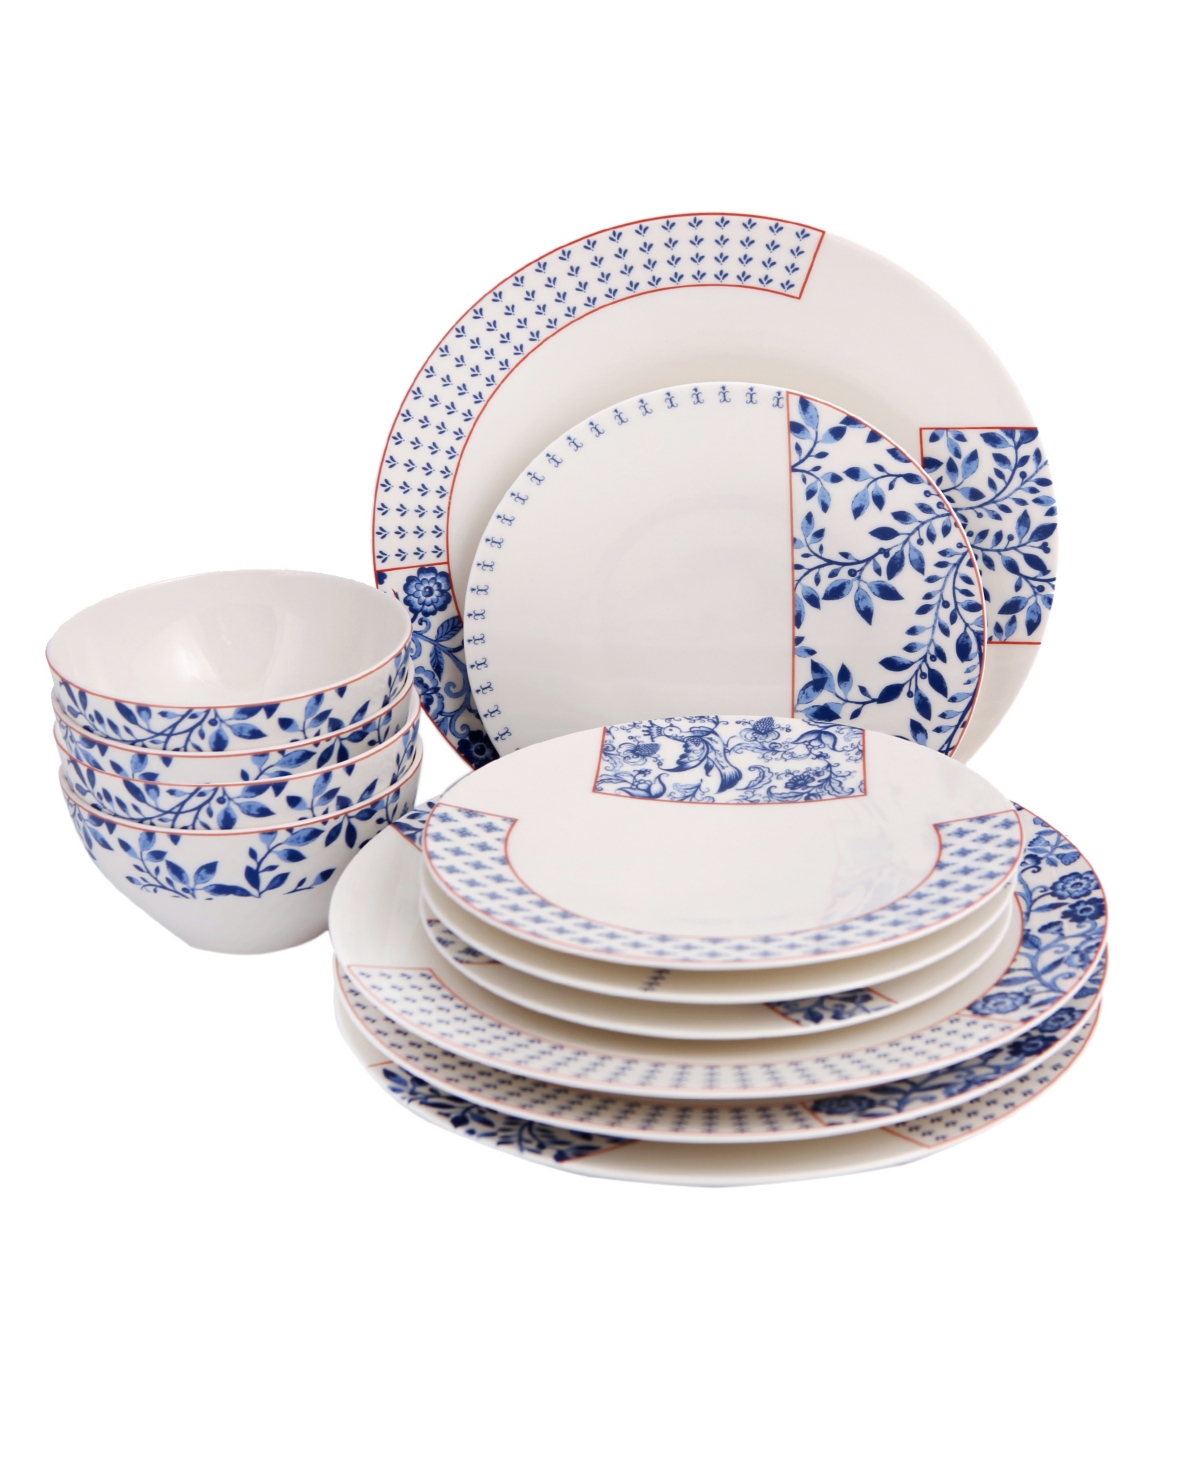 Folksy 12-Piece Dinner Set - Blue and White